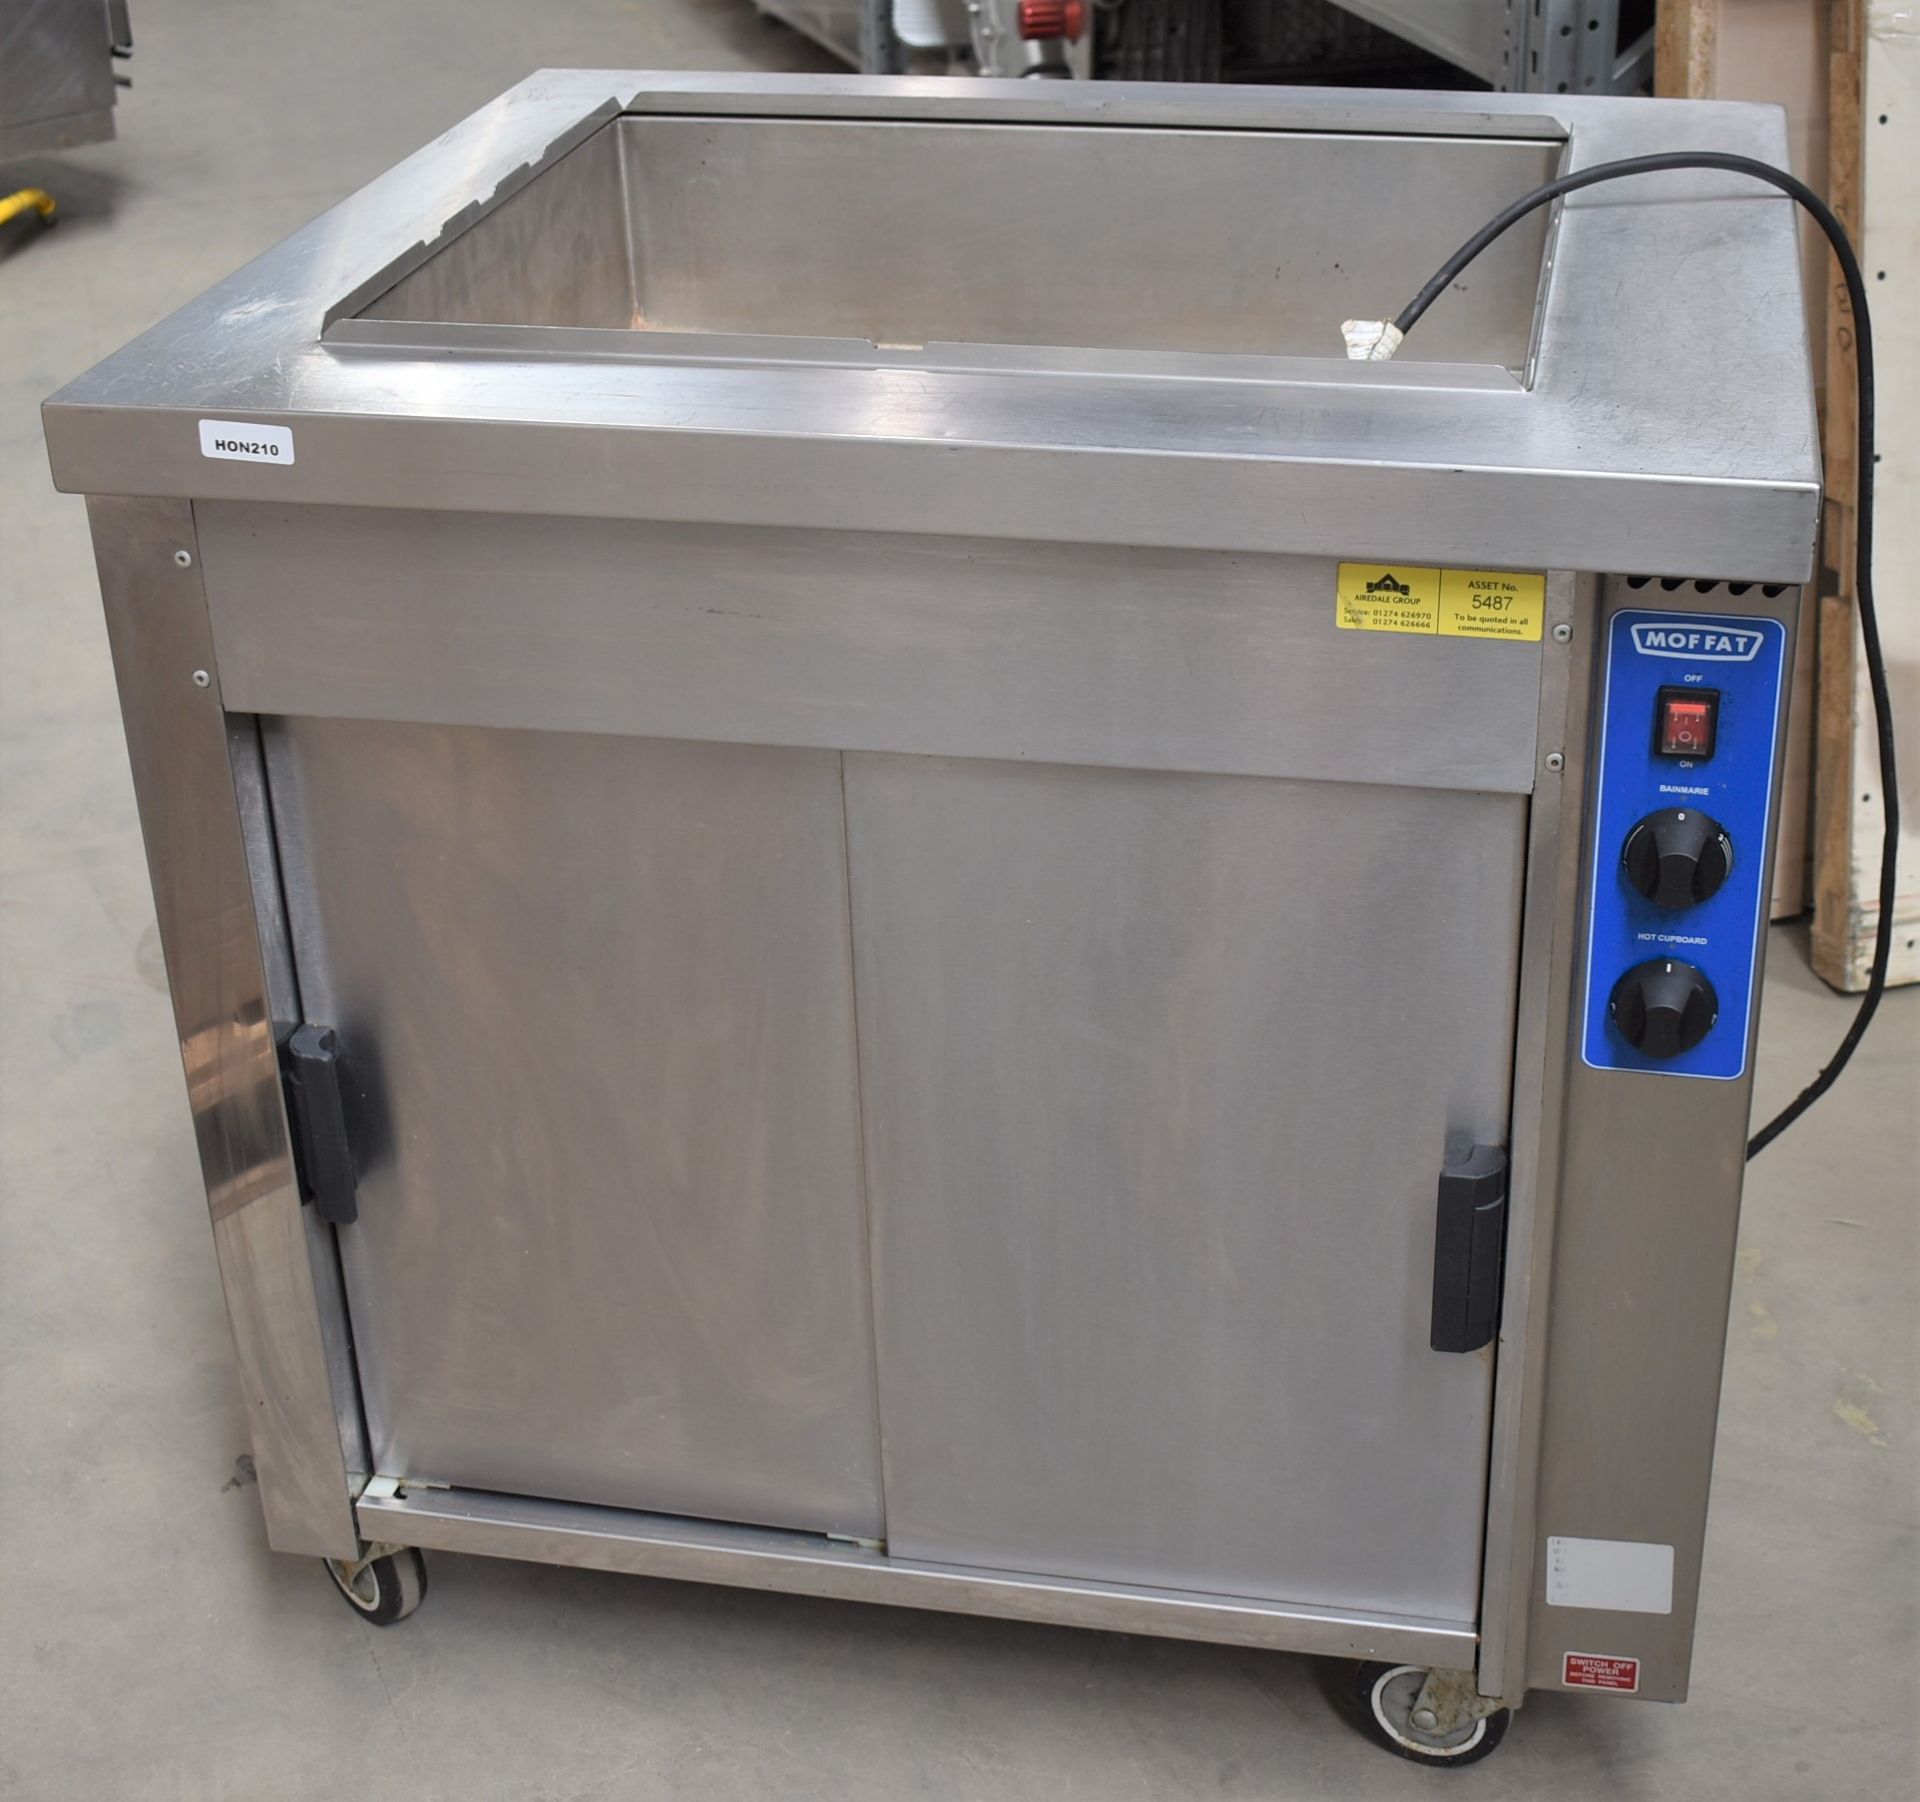 1 x Moffat Mobile Baine Marie With Heated Food/Plate Cabinet - 240v - Stainless Steel Exterior - Image 10 of 13